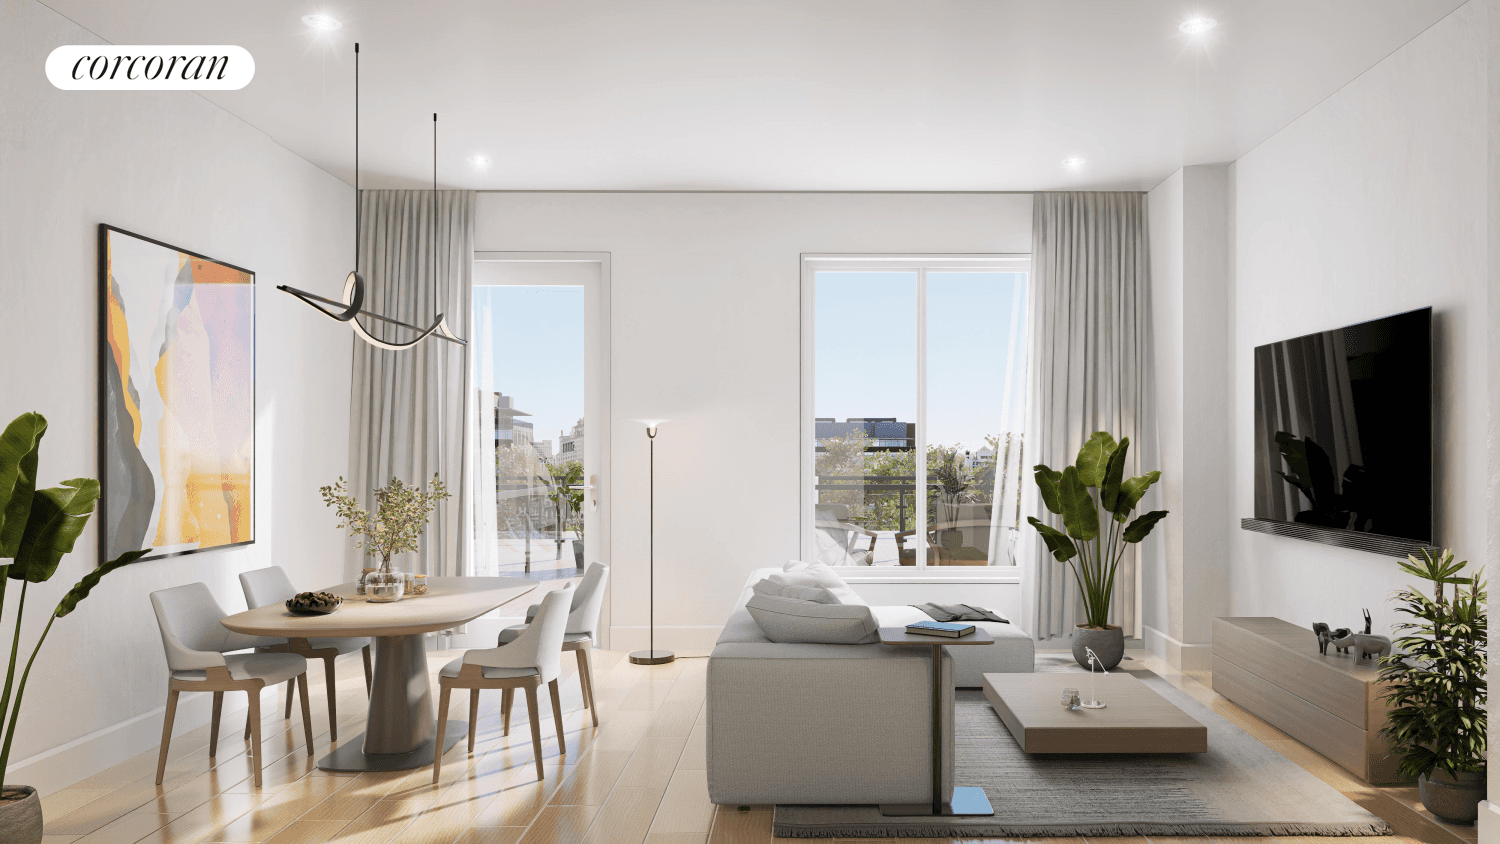 PREVIEWS COMMENCE, FEB 1 Bathed in sunlight and perfectly at home in Prospect Lefferts Gardens, The Rogers Residences is the first in a new generation of luxury condominiums.